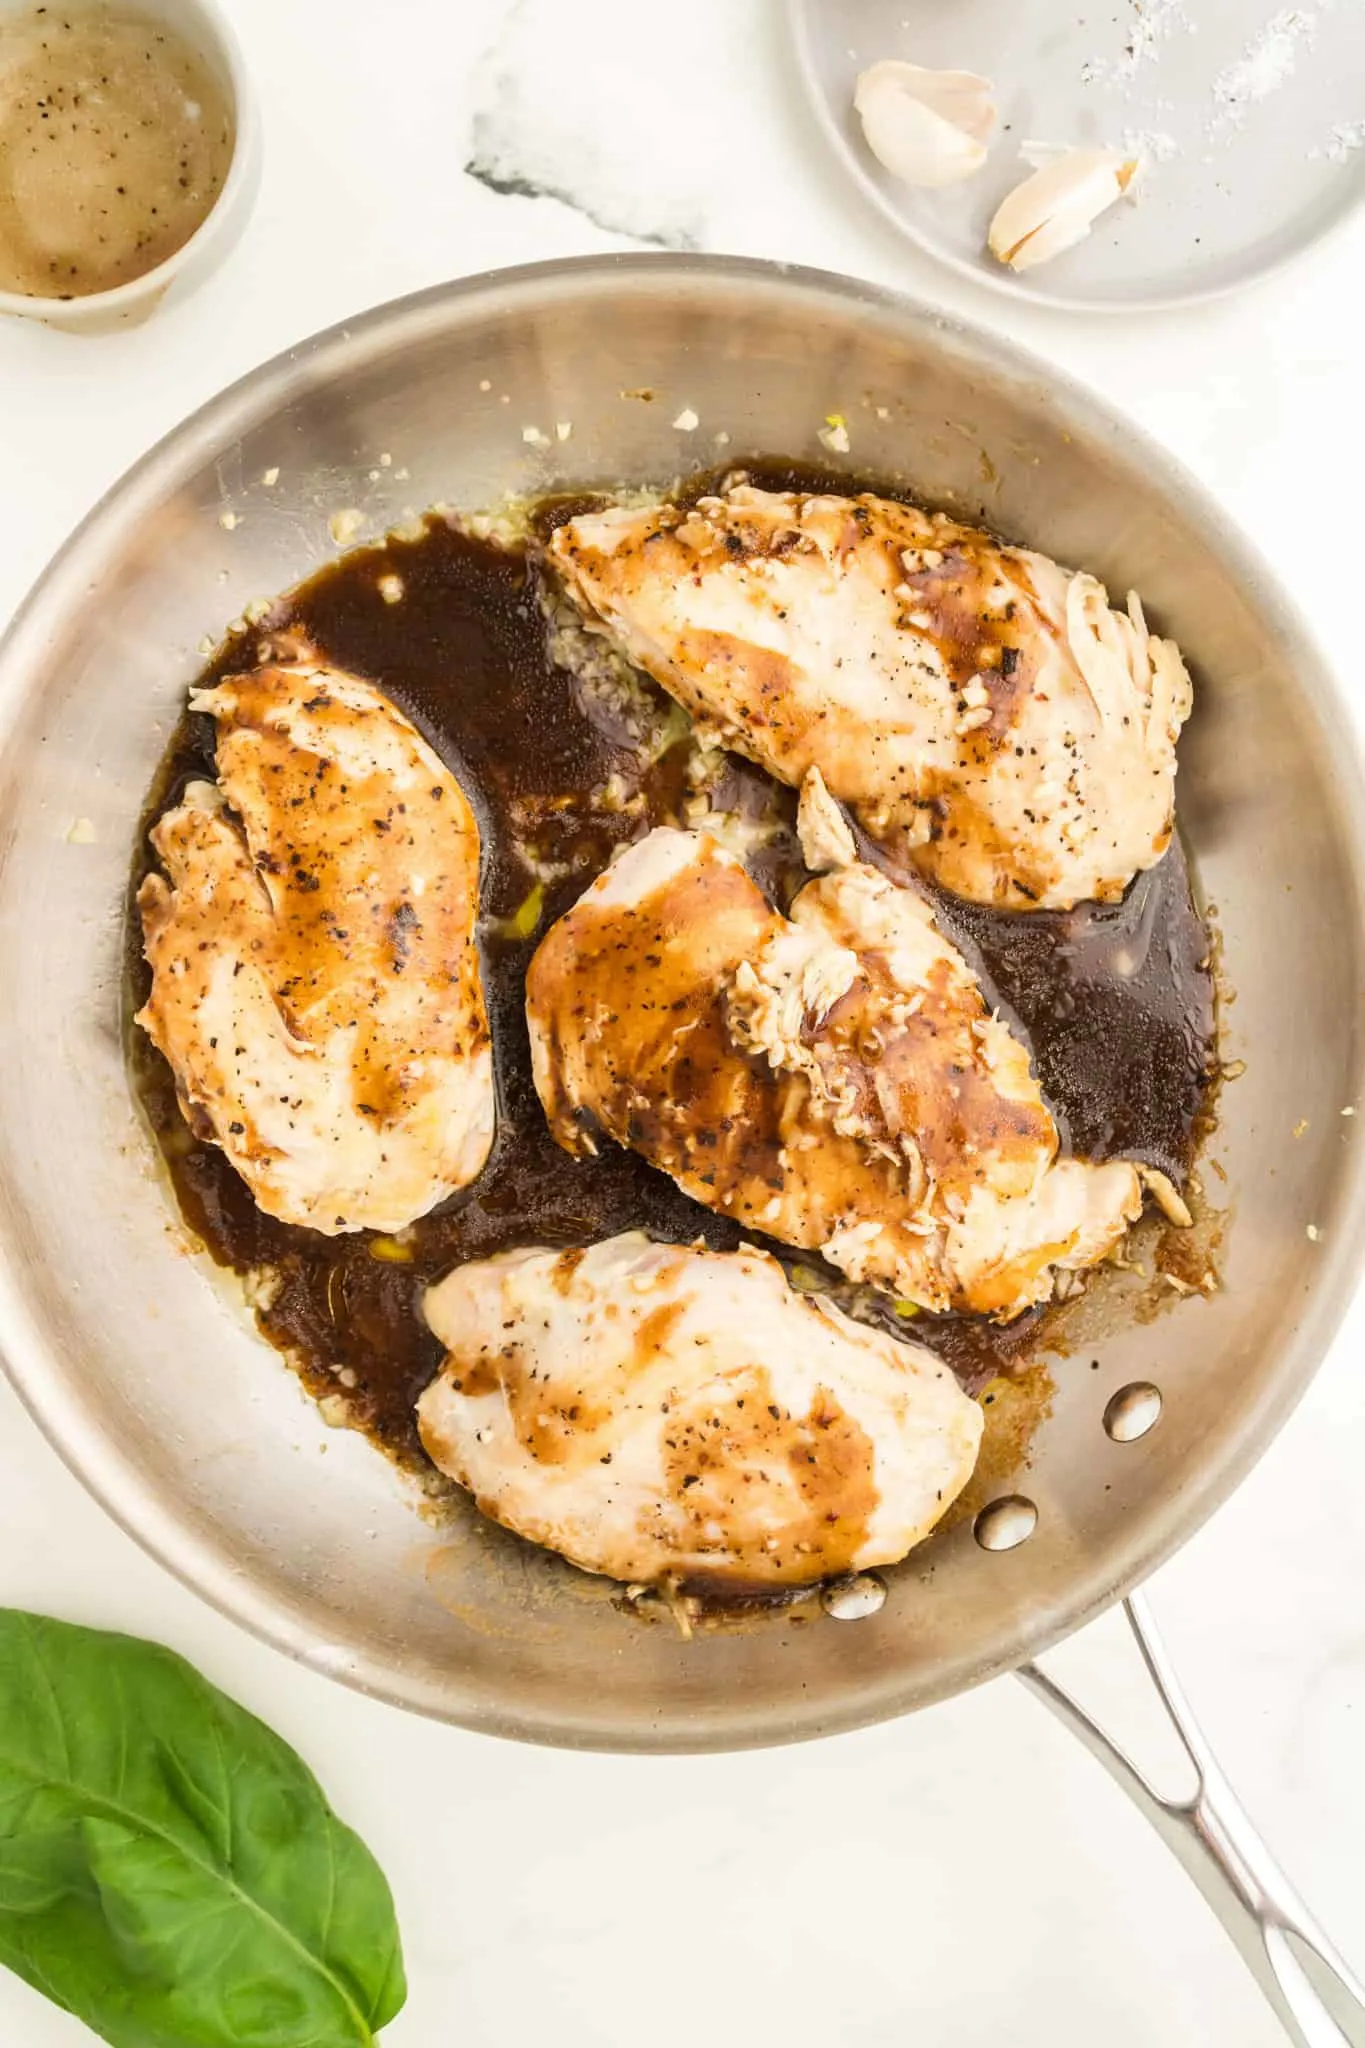 balsamic vinaigrette on top of chicken breasts in a skillet